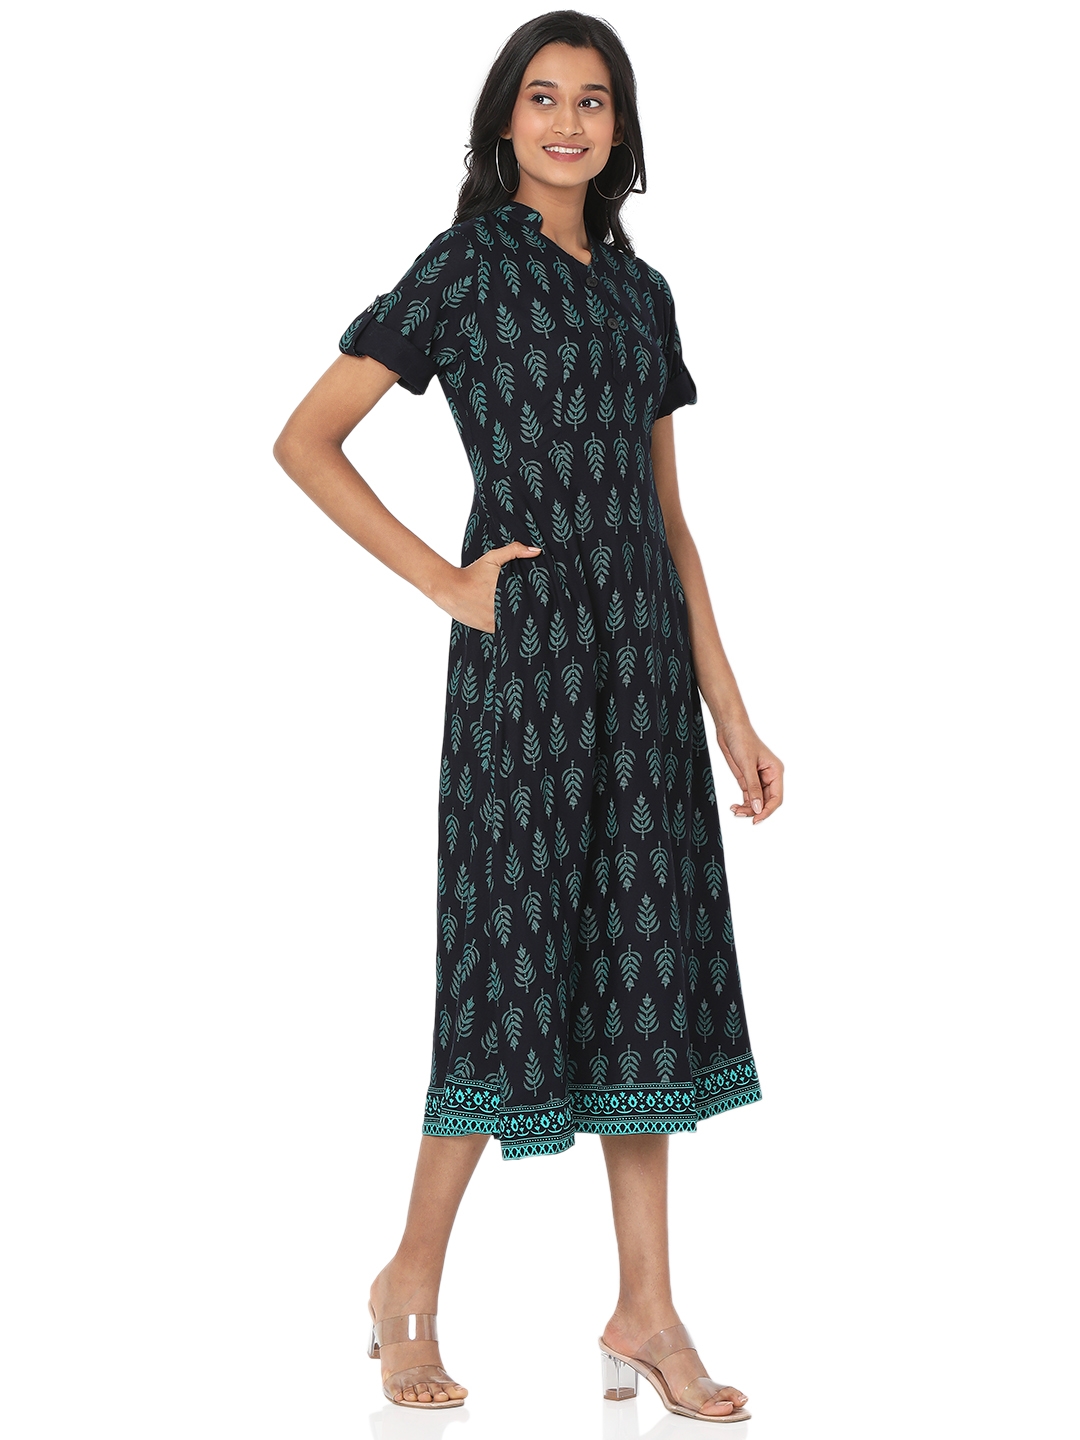 Smarty Pants | Smarty Pants women's cotton fabric green color alpine tree printed dress. 2